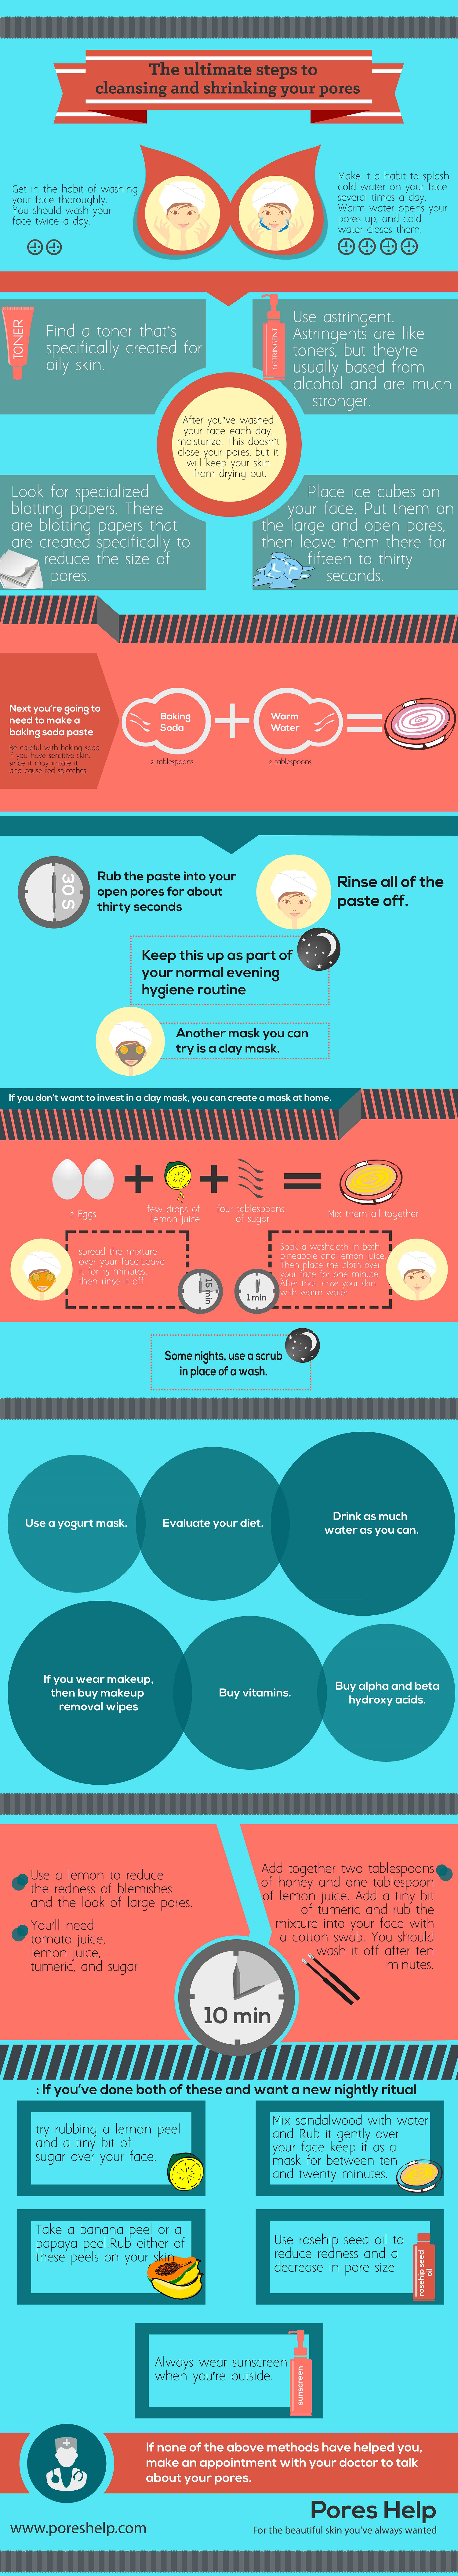 Your Ultimate Guide for Solving Large Pores Problem
(Infographic)